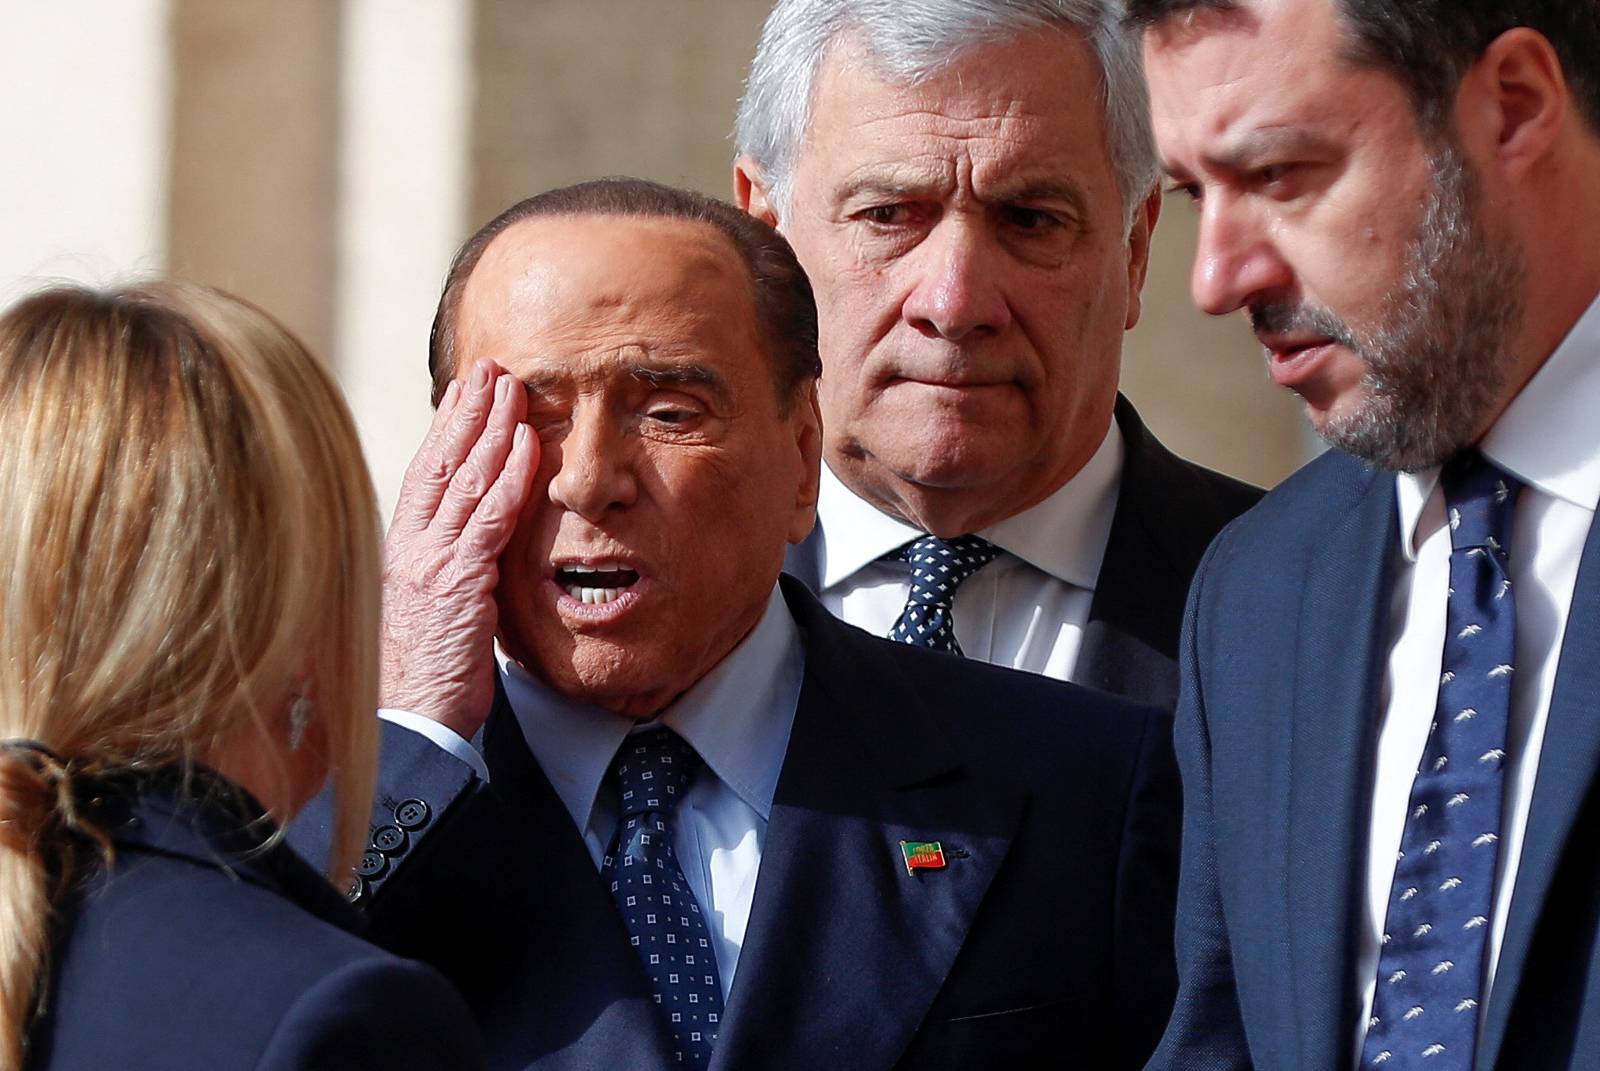 Meloni differs with the leaders of Italy's other coalition parties over their historic positions on Ukraine and Russia. /Guglielmo Mangiapane/Reuters